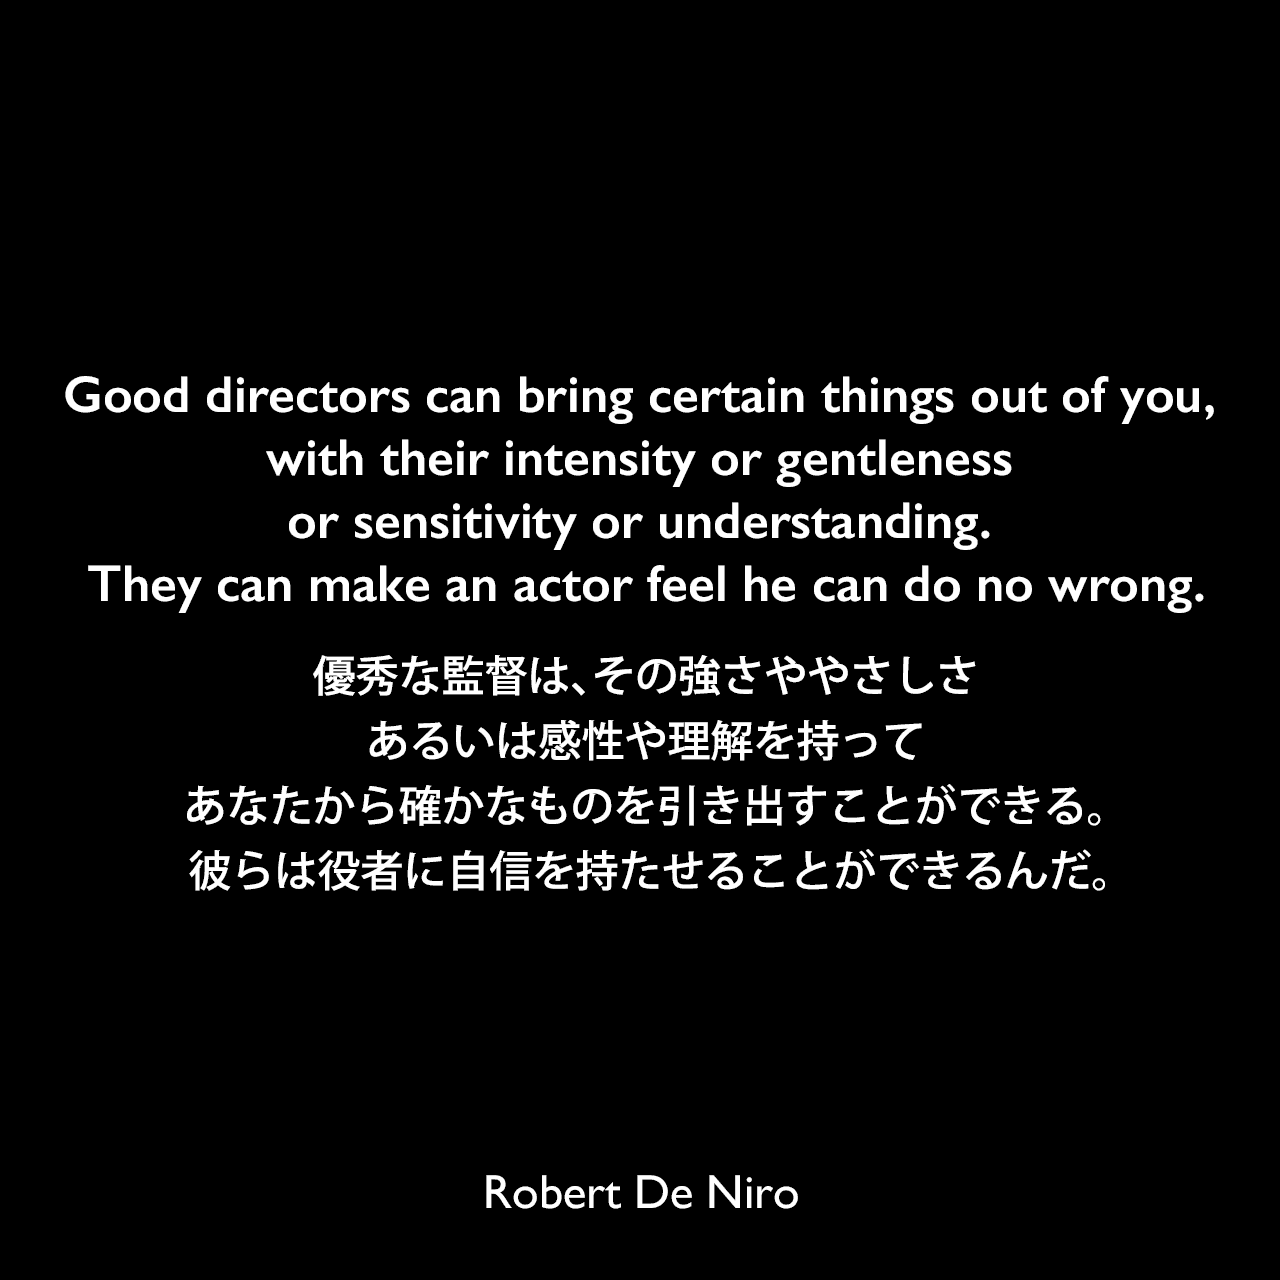 Good directors can bring certain things out of you, with their intensity or gentleness or sensitivity or understanding. They can make an actor feel he can do no wrong.優秀な監督は、その強さややさしさ、あるいは感性や理解を持って、あなたから確かなものを引き出すことができる。 彼らは役者に自信を持たせることができるんだ。Robert De Niro